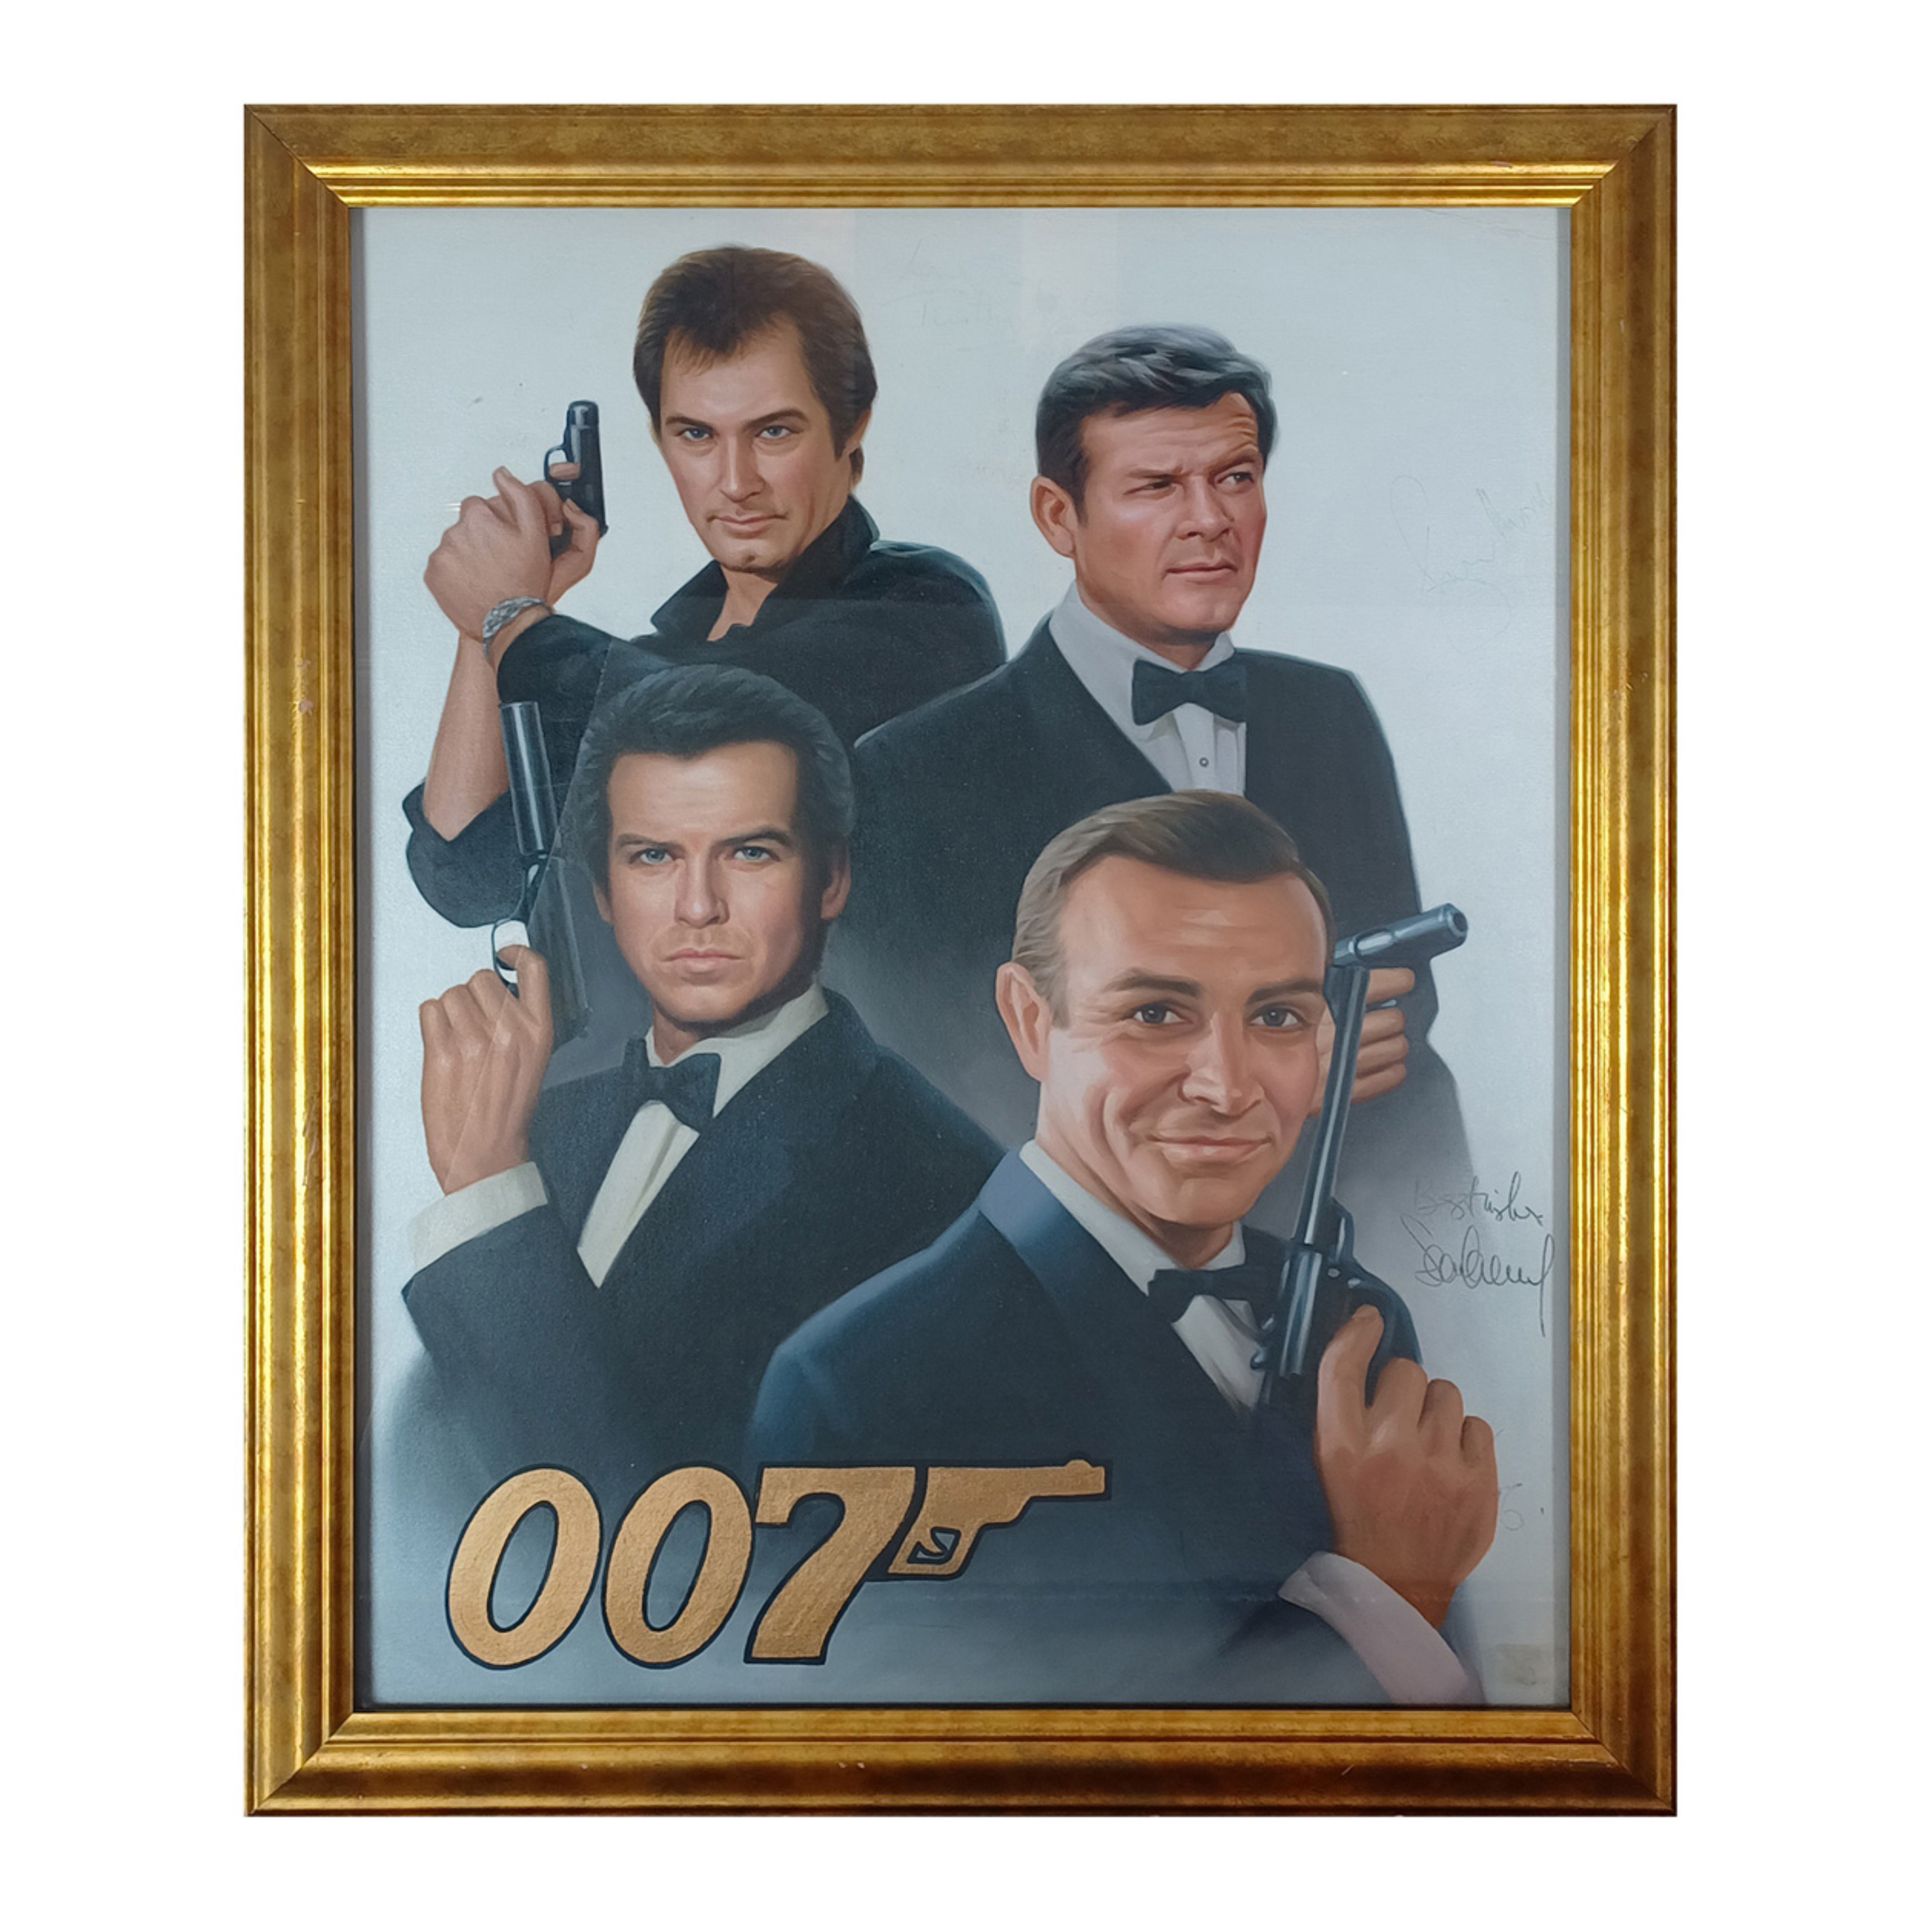 Oil Painting of 4 James Bond Actors with Signatures - Image 3 of 8